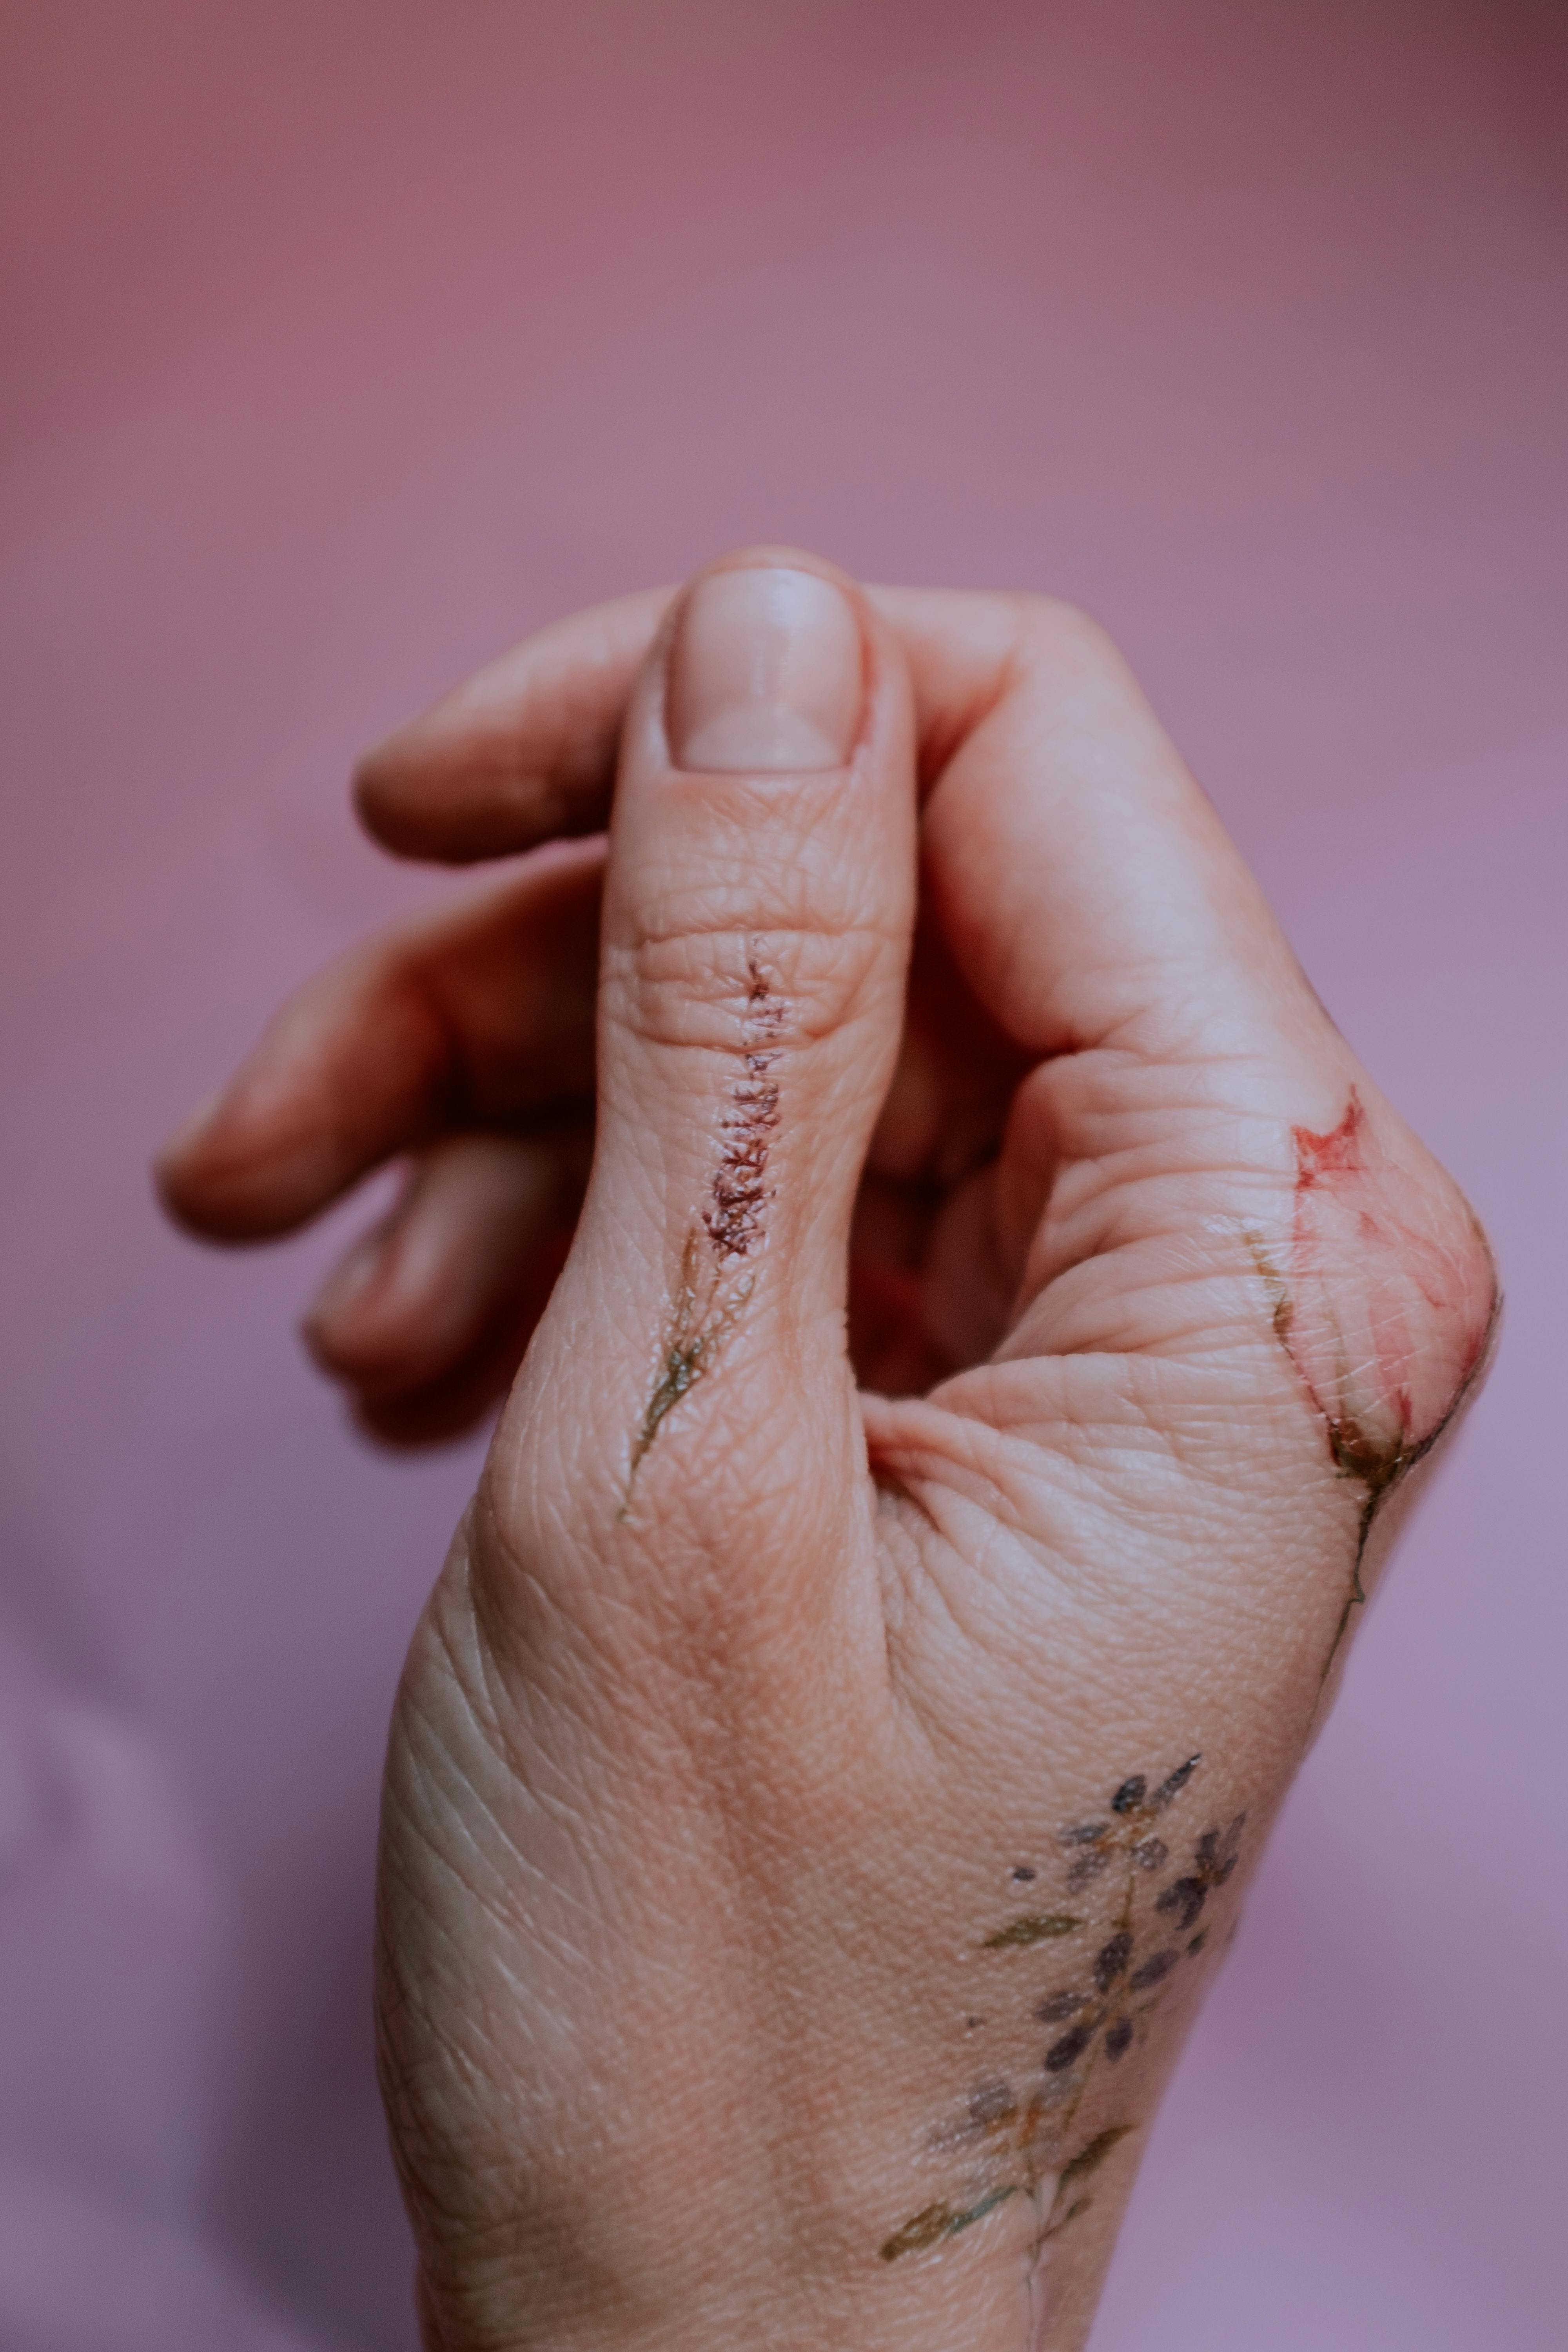 Generate an image of a top view of a light-skinned human hand. between the  thumb and index finger, distinctly ink a dark, bold semi-colon (;) tattoo.  this semi-colon symbolizes mental health awareness